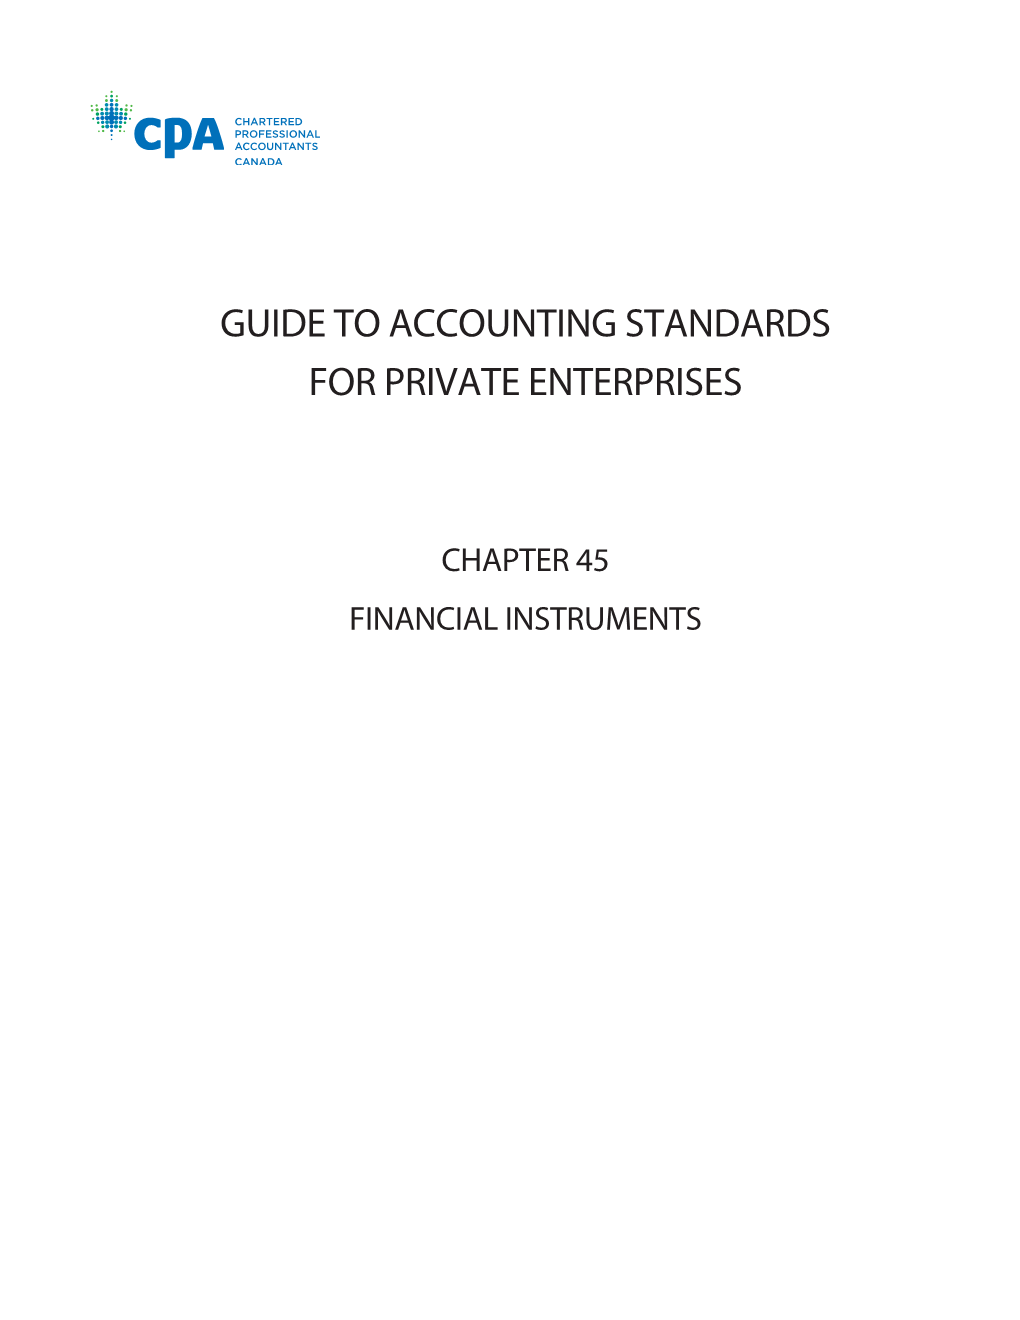 Guide to Accounting Standards for Private Enterprises